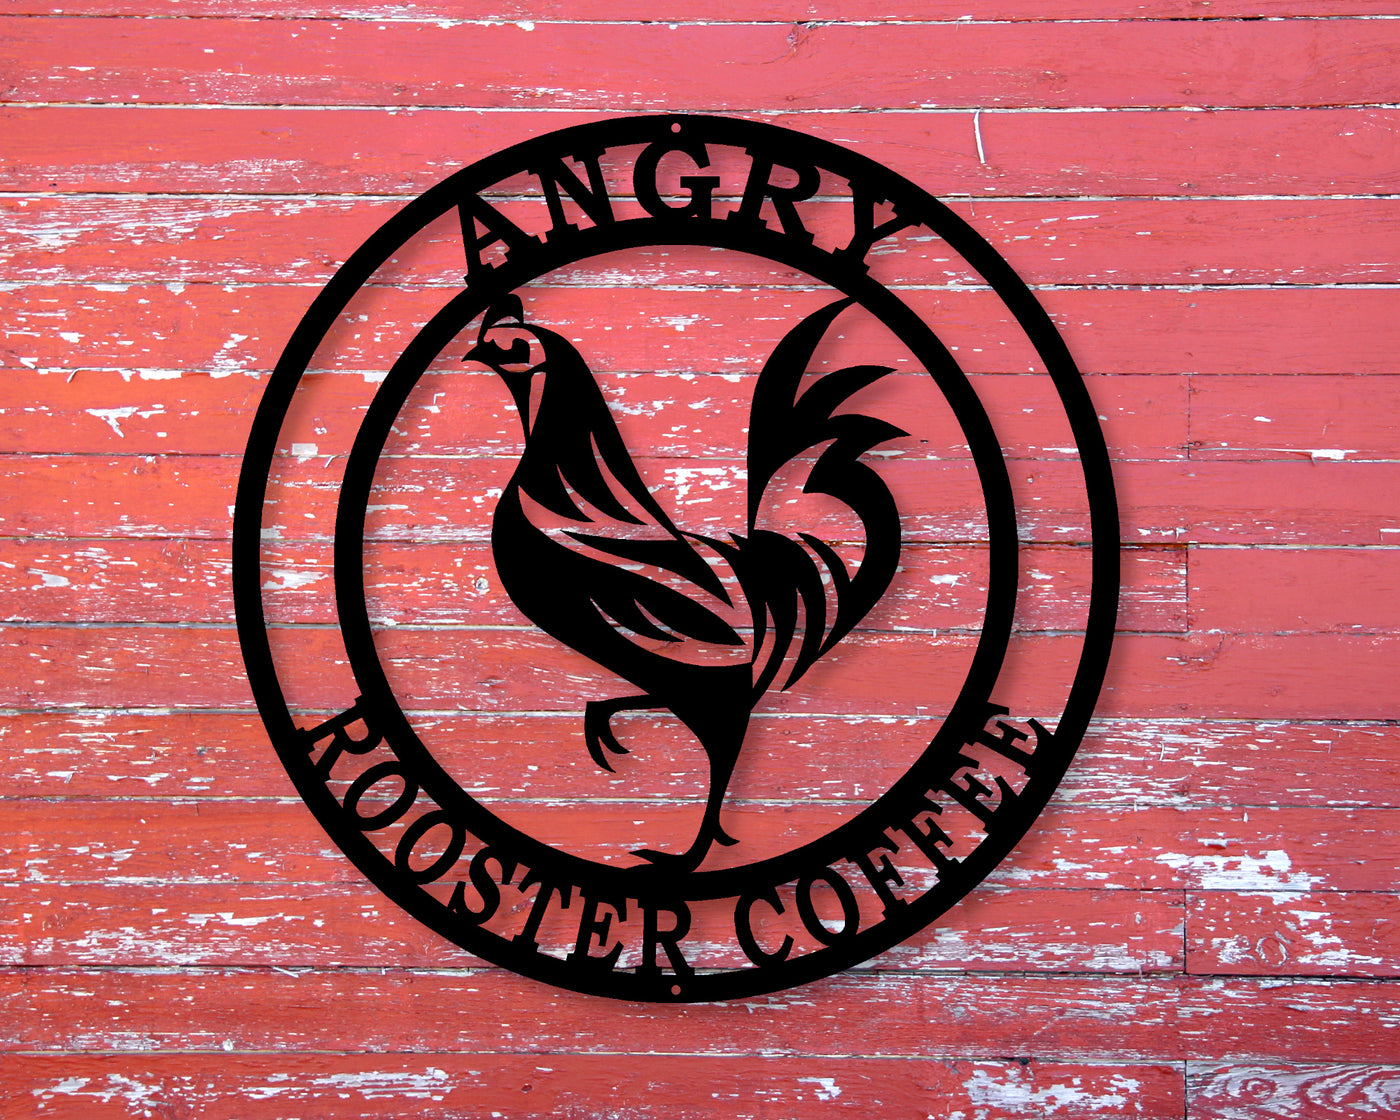 Personalized Rooster Metal Sign - Madison Iron and Wood - Personalized sign - metal outdoor decor - Steel deocrations - american made products - veteran owned business products - fencing decorations - fencing supplies - custom wall decorations - personalized wall signs - steel - decorative post caps - steel post caps - metal post caps - brackets - structural brackets - home improvement - easter - easter decorations - easter gift - easter yard decor